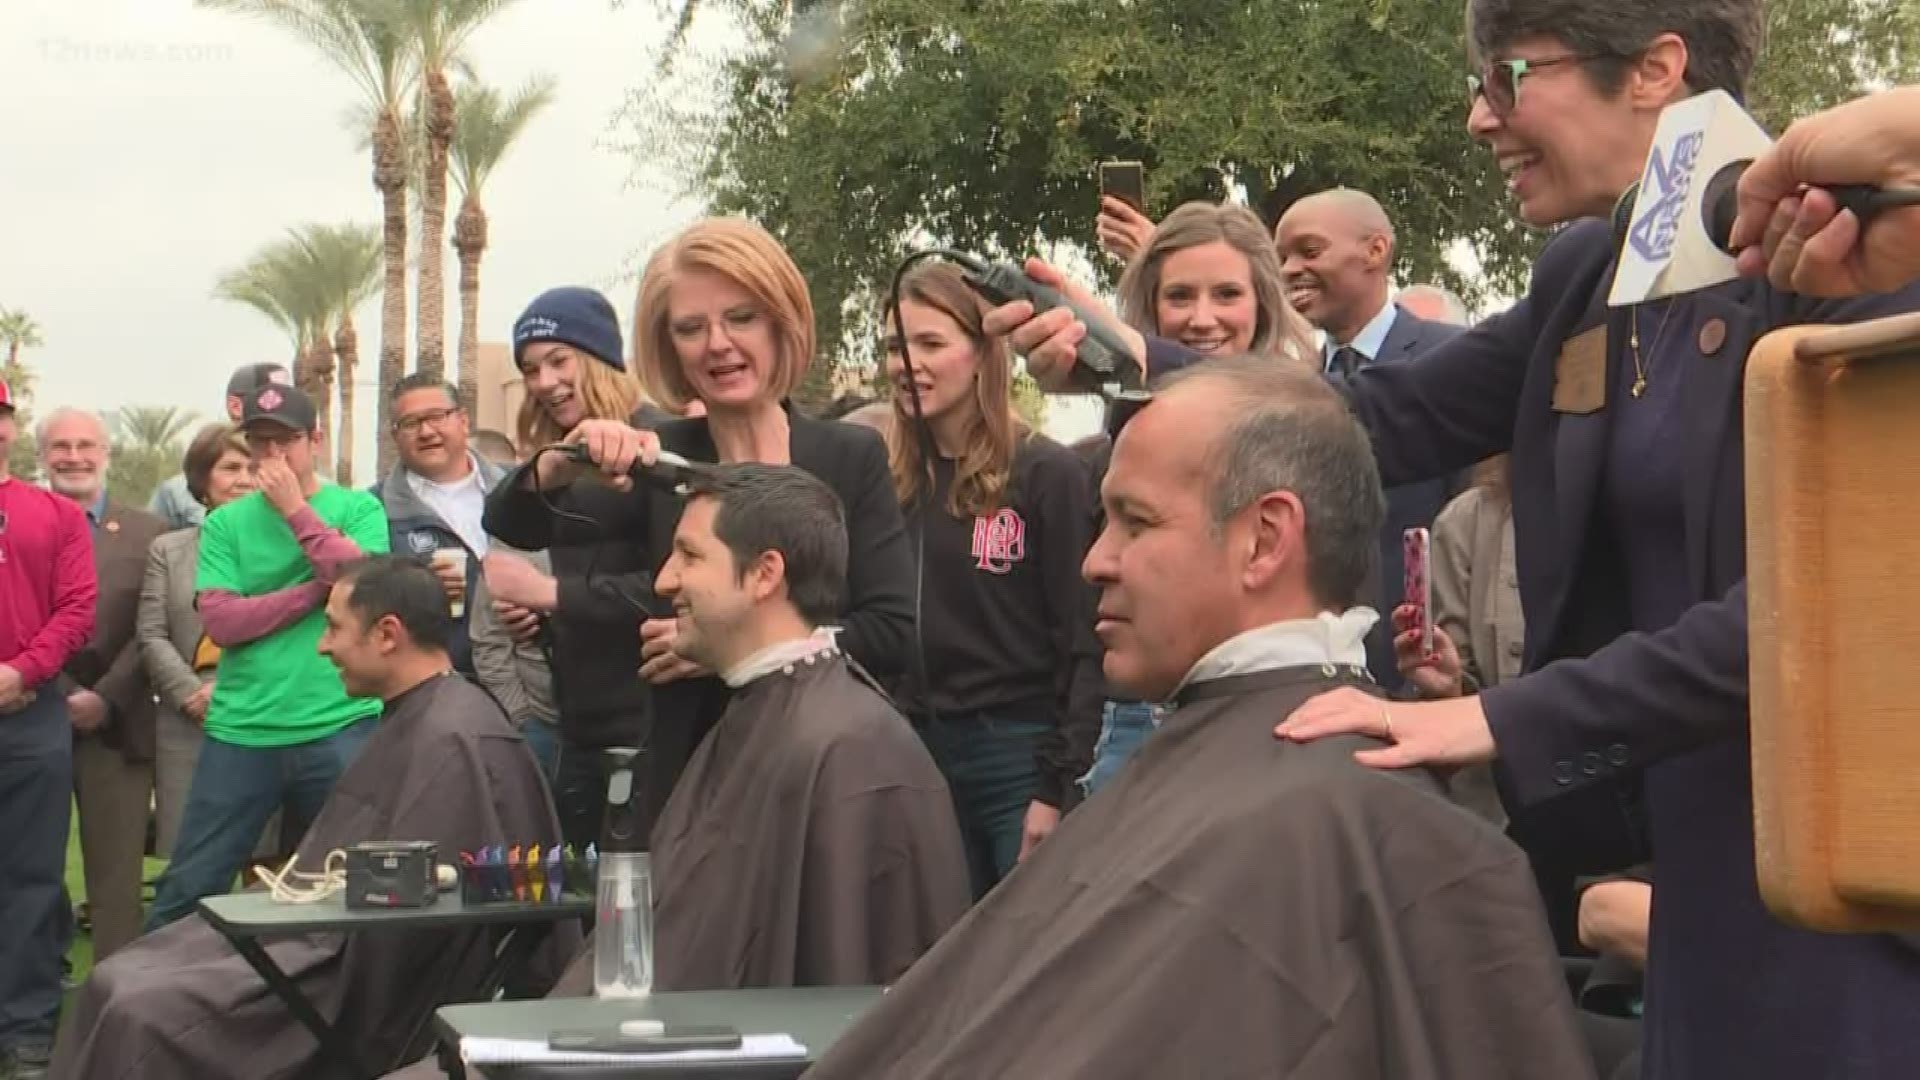 State lawmakers showed their commitment to first responders with cancer today by shaving their heads. It was part of push for new legislation.